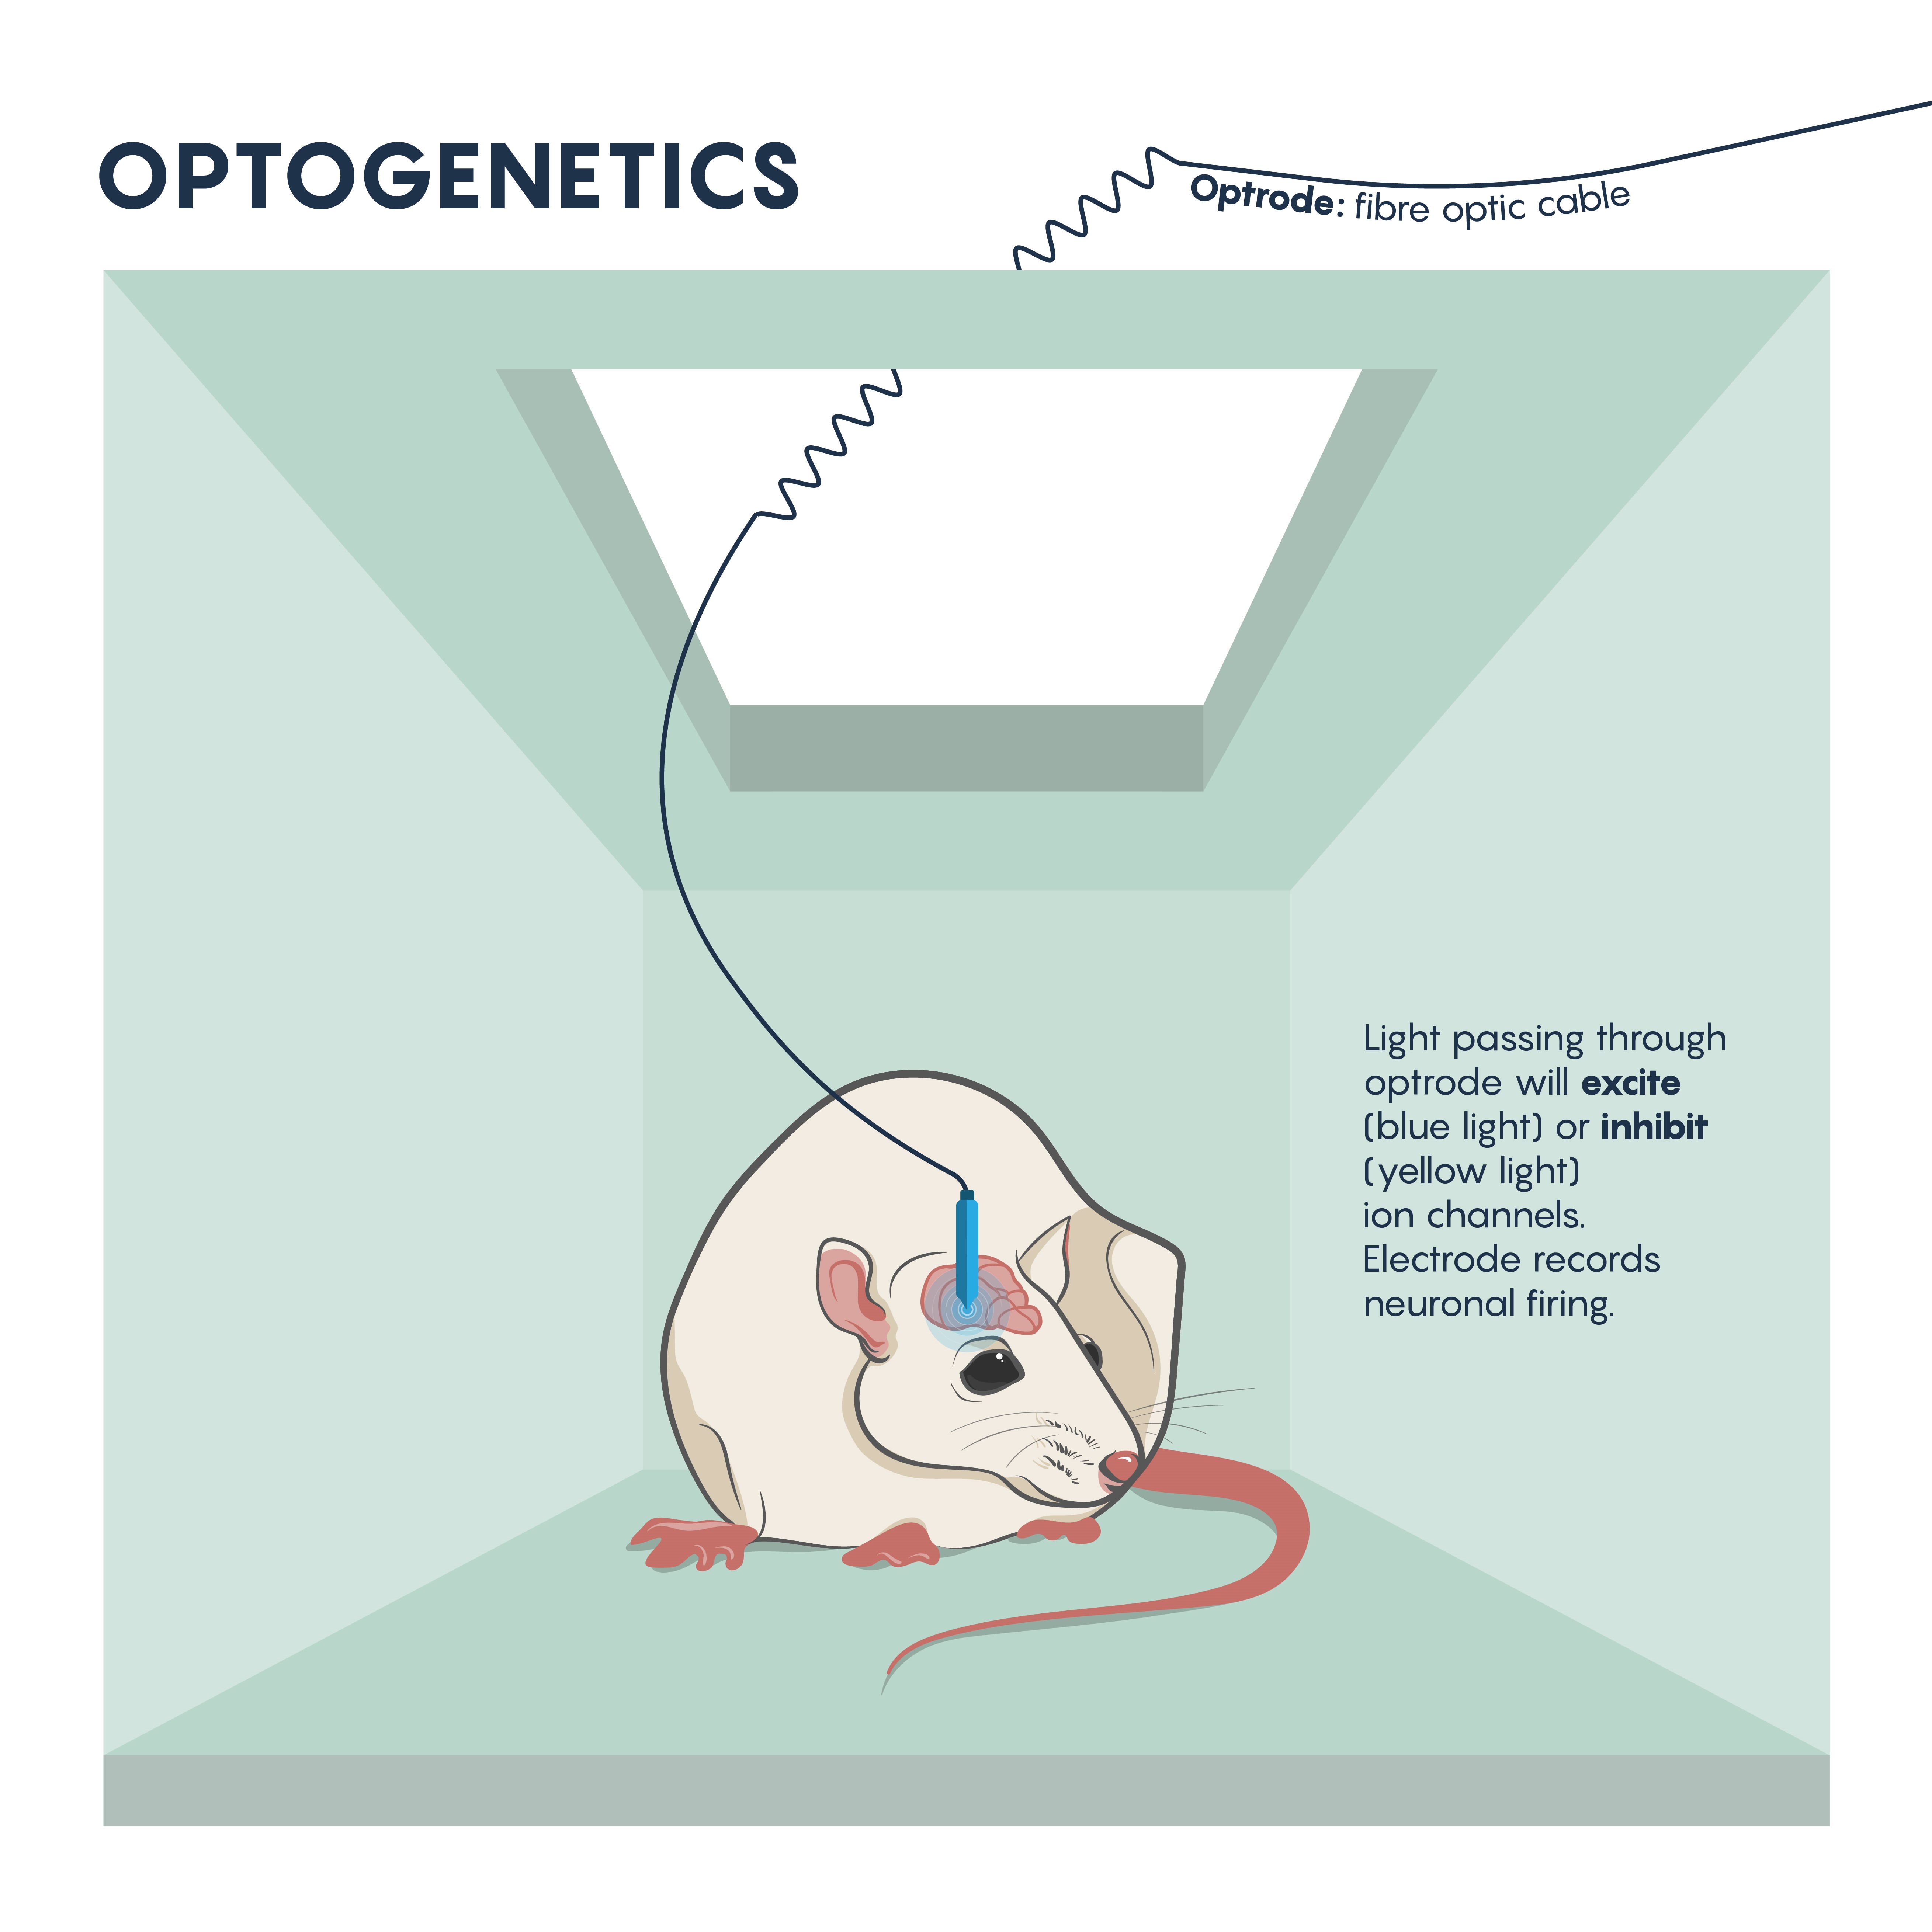 The beginnings of brain circuit studies in mice using optrodes to excite or inhibit ion channels.